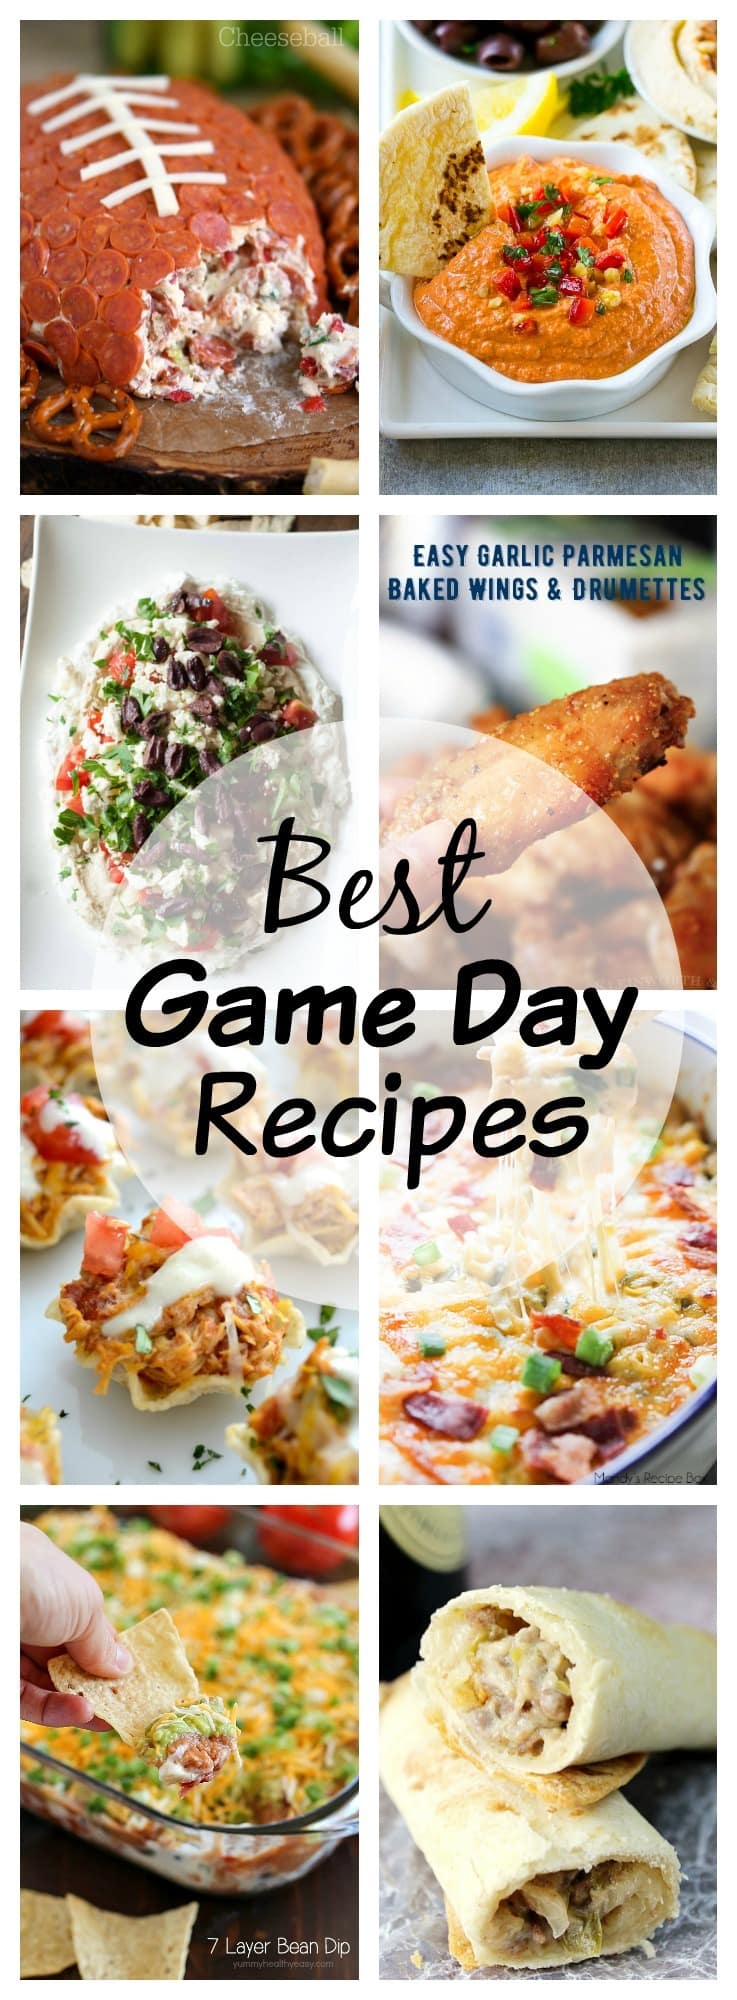 Over 20 of the Best Game Day Recipes! Make watching the football games even more enjoyable by eating yummy food! Here are 20+ appetizer recipes you will love!